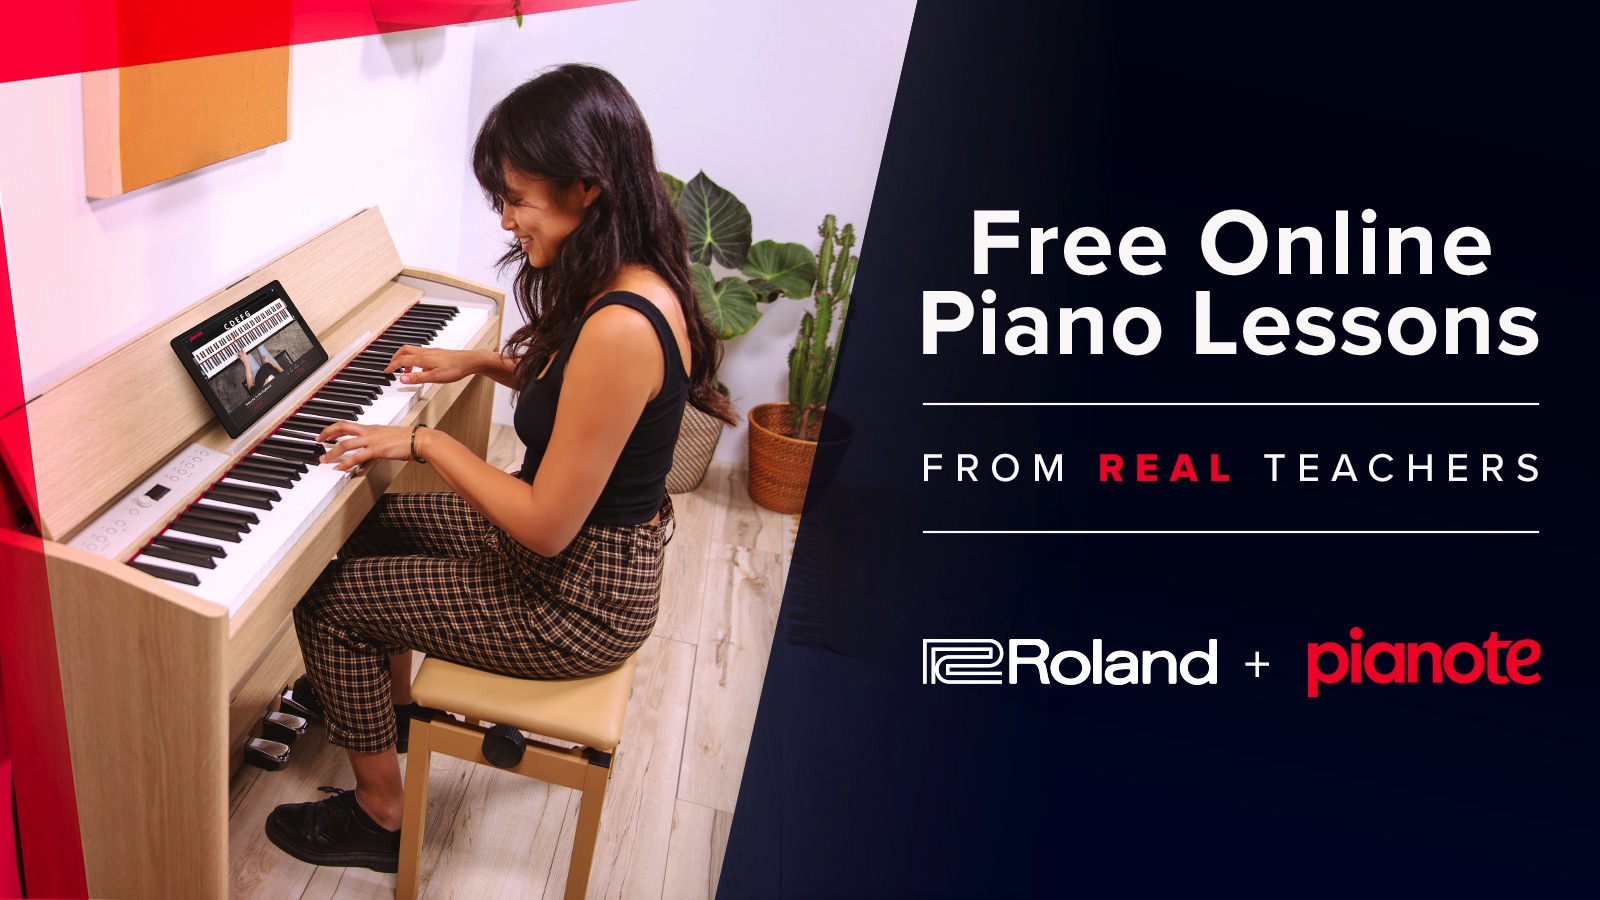 Roland Pianote Offer